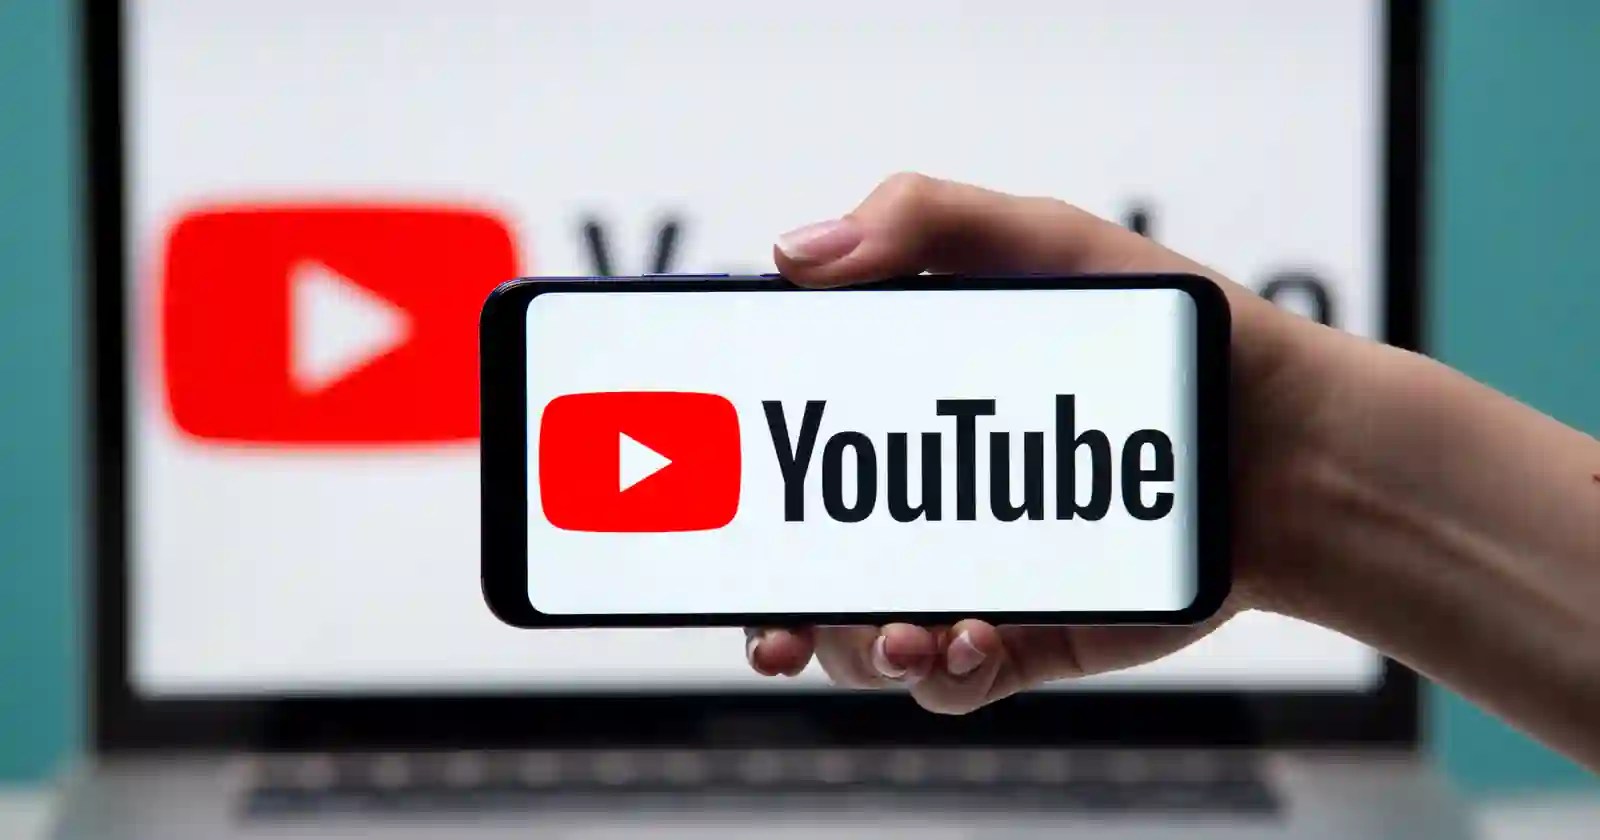 5 Most Effective Ways To Get YouTube Views